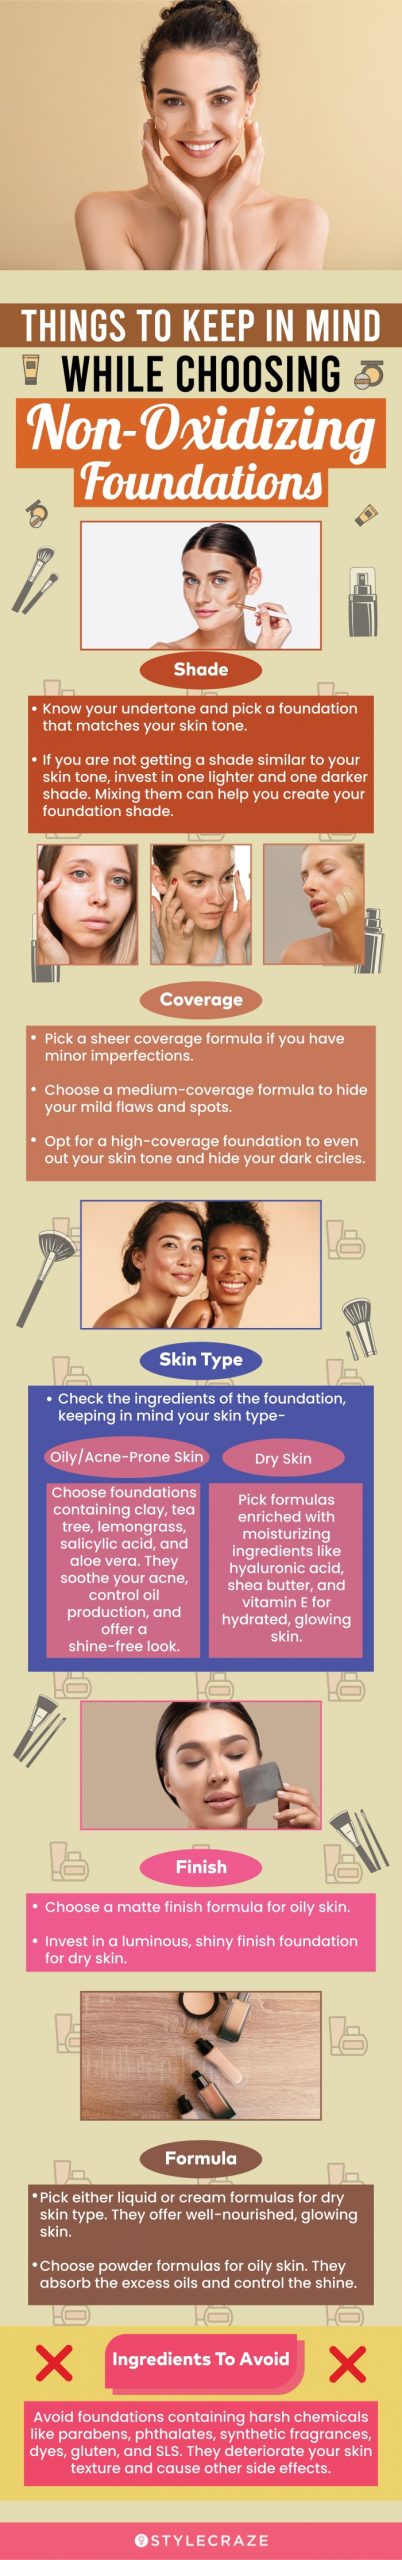 Things To Keep In Mind While Choosing Non-Oxidizing Foundations (infographic)